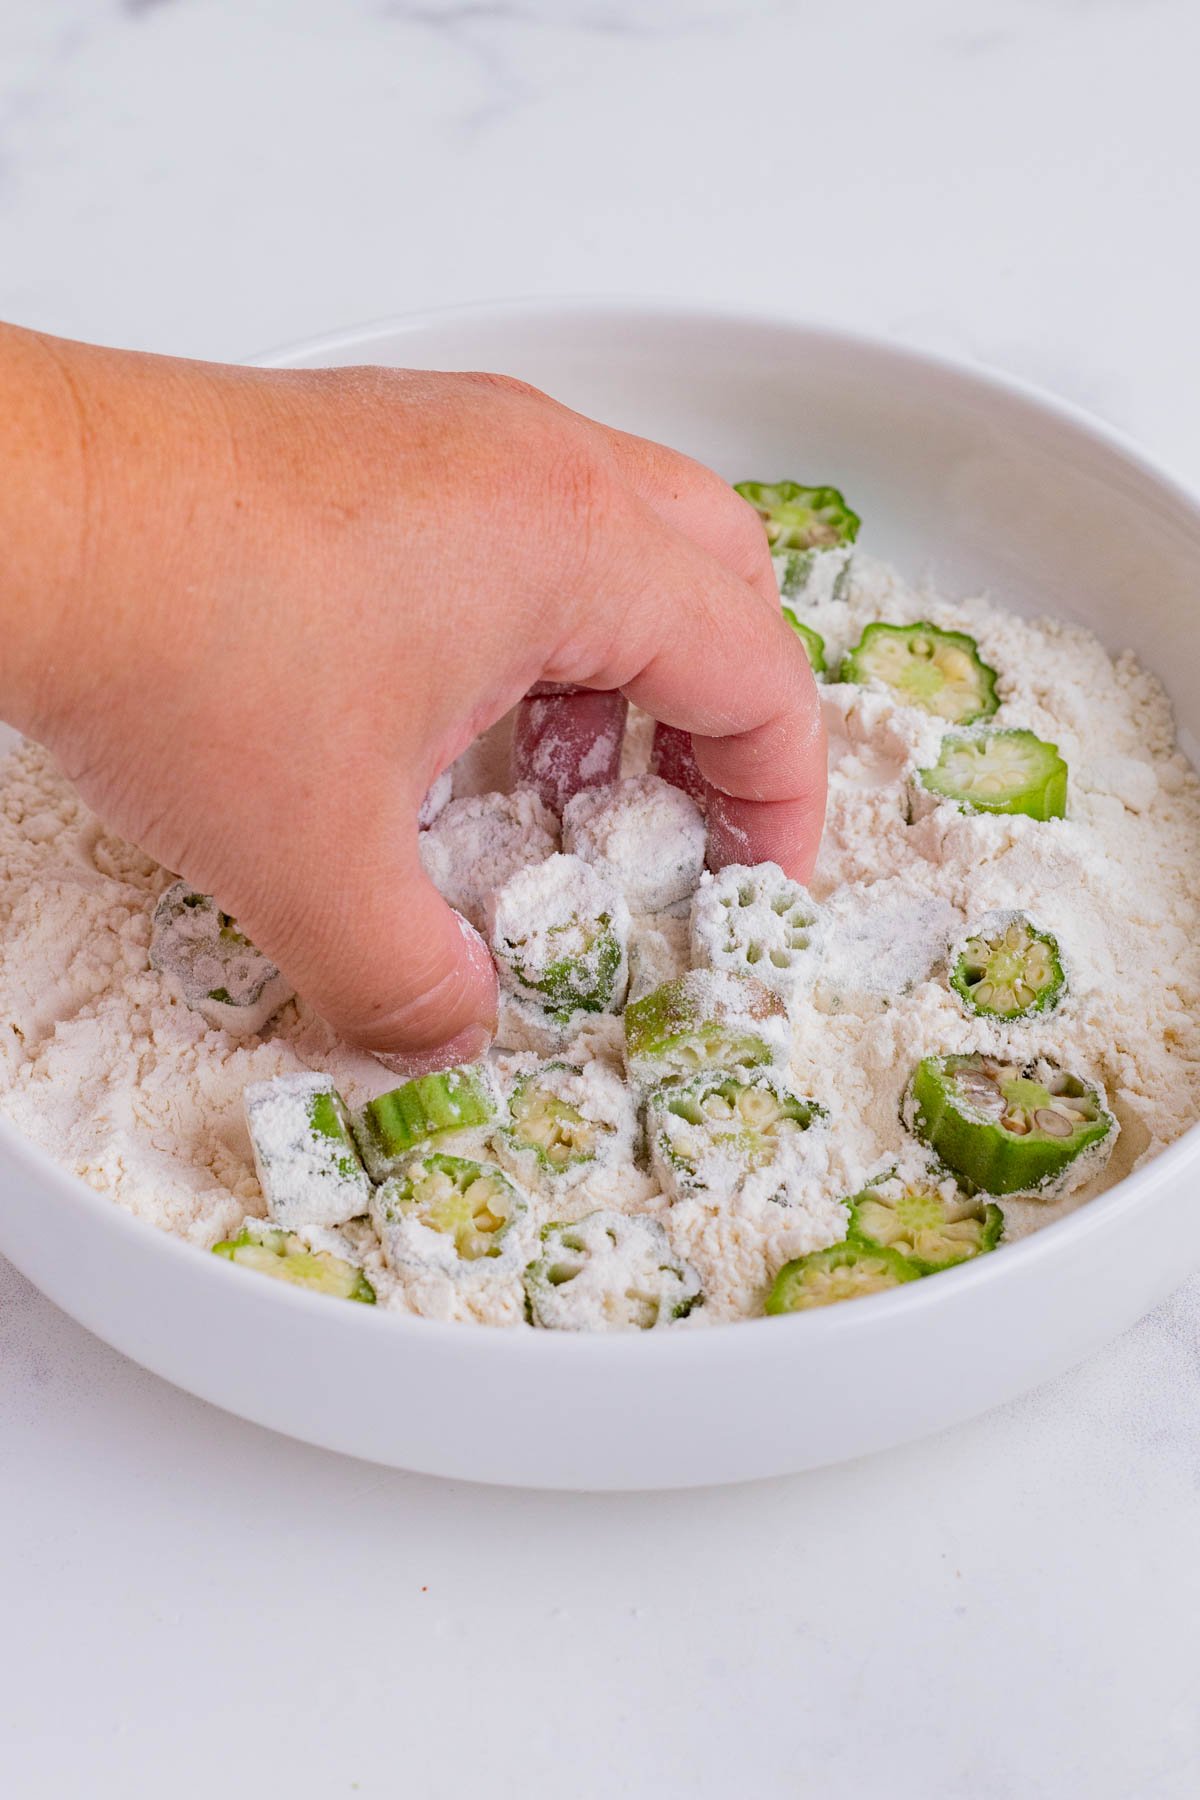 A hand adds okra slices to flour.